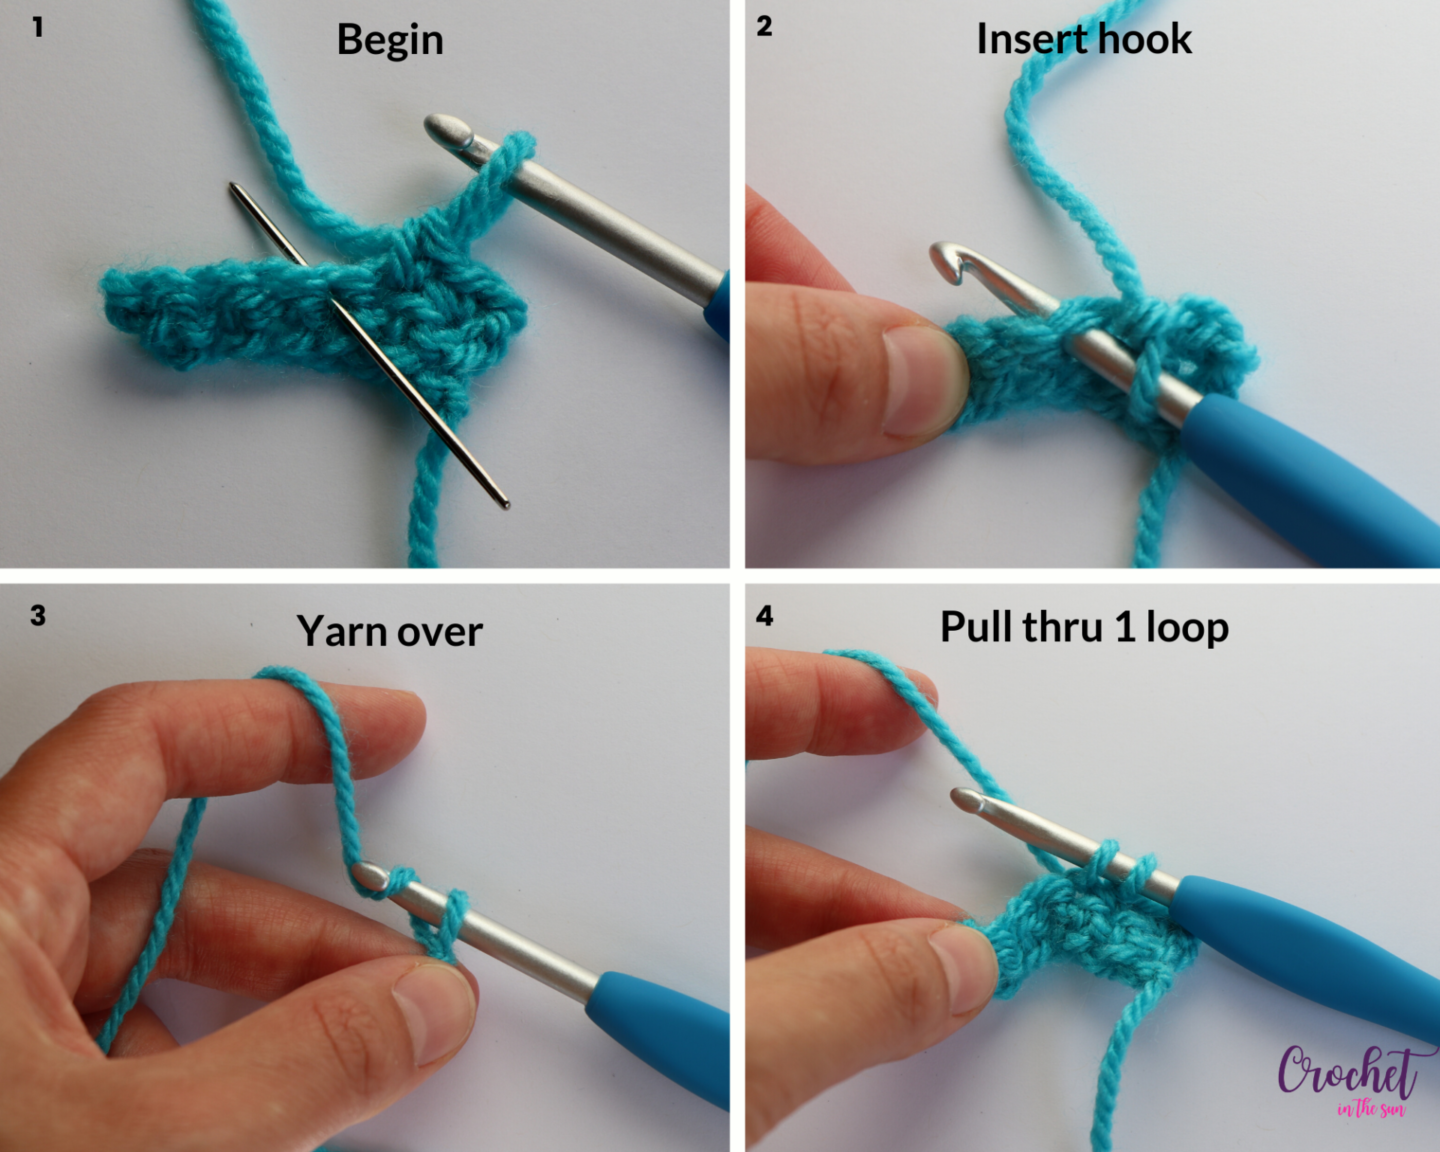 Learn to Crochet, Step by Step, Easy Crochet Guide, Basic Crochet Stitches,  Crochet Tutorial, Crochet for Beginners, Video Lessons 